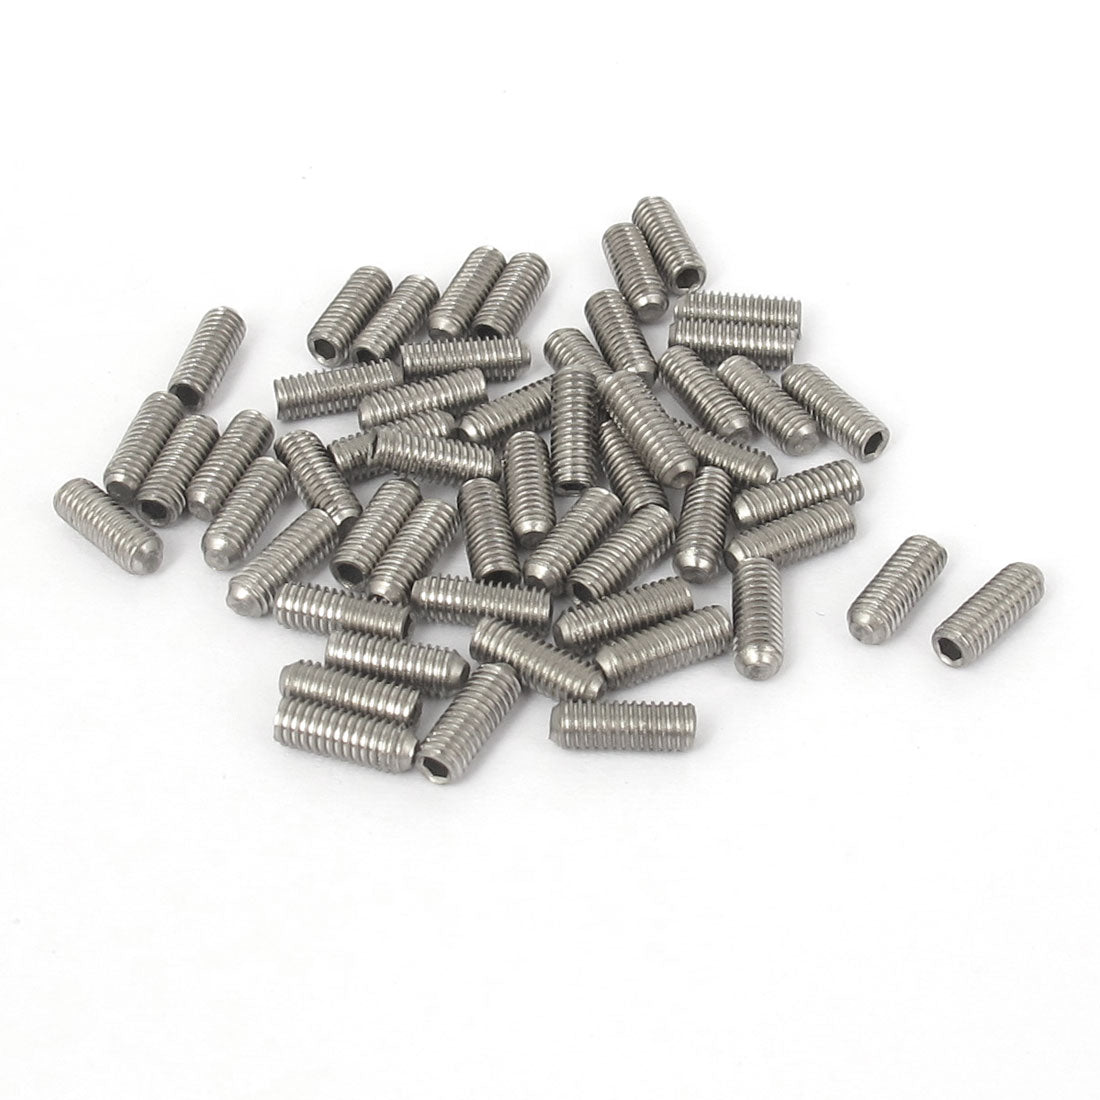 uxcell Uxcell M3x8mm Stainless Steel Hex Socket Set Cap Point Grub Screws Silver Tone 50pcs